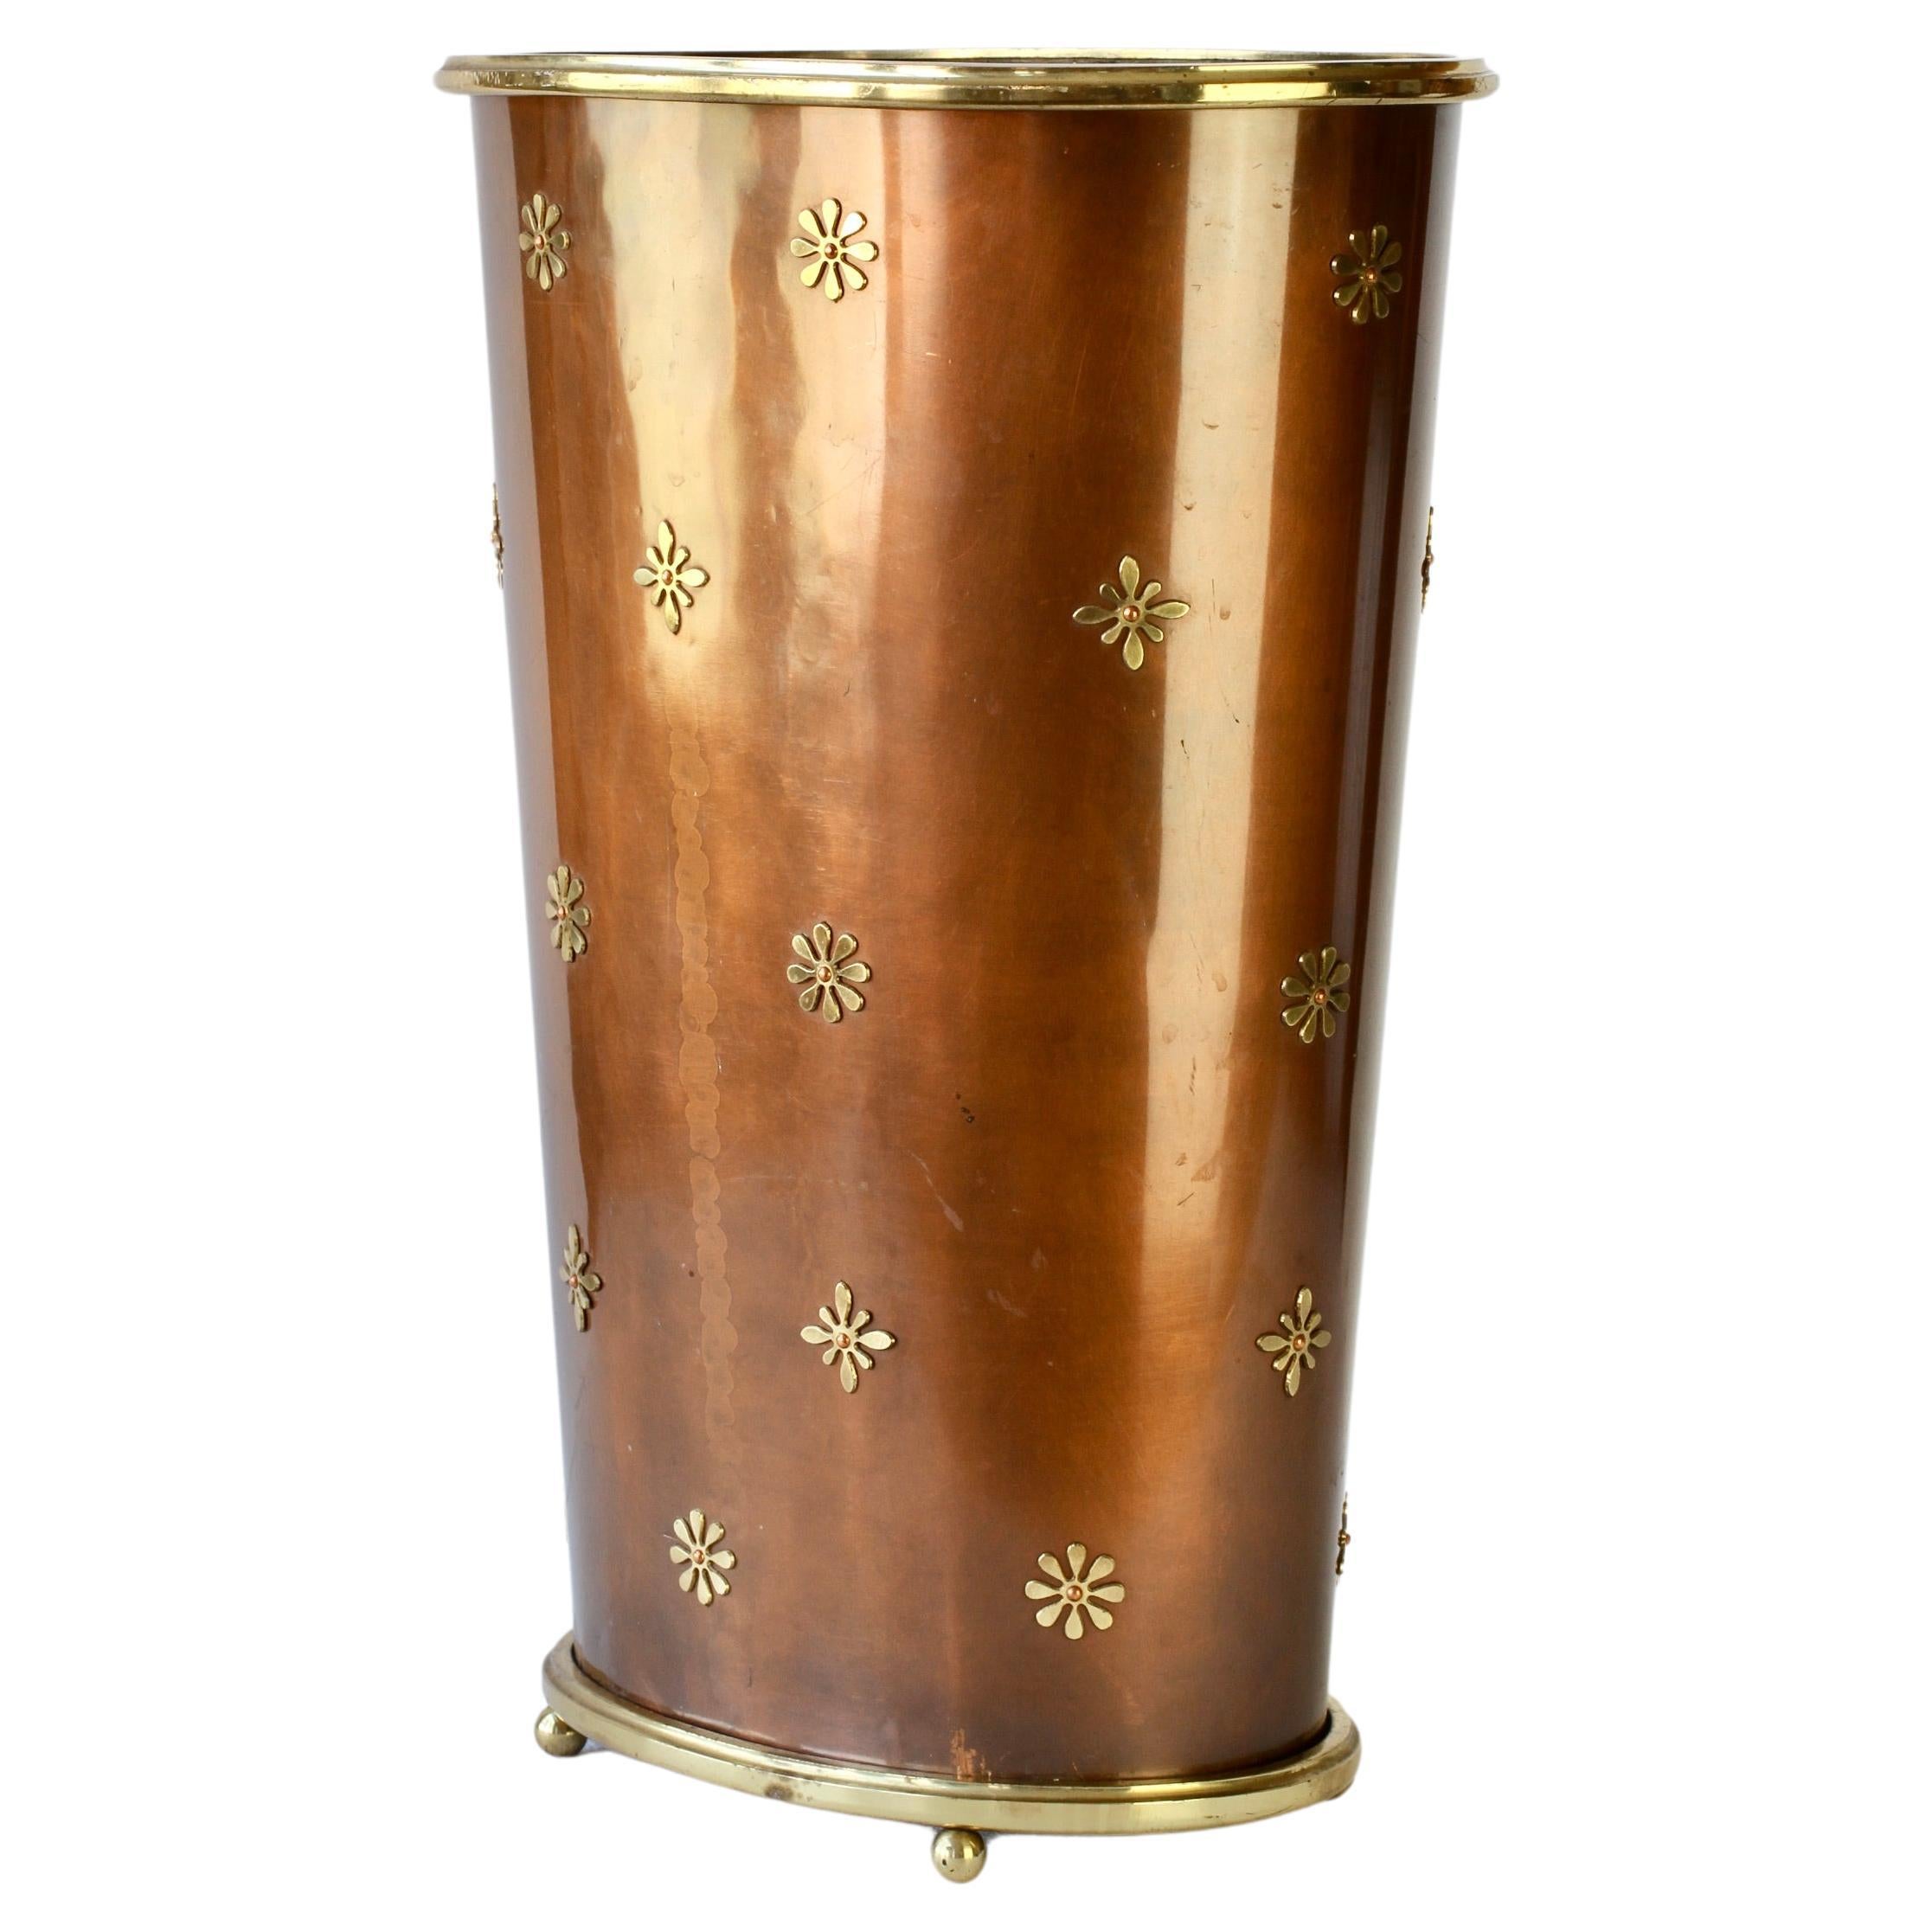 Delightful handcrafted German Mid-Century modern umbrella stand or holder by the Vereinigte Werkstätten (Atelier) München, circa 1955. Handmade in patinated copper with cast brass trim and base, finished with delicate brass flower petal details.